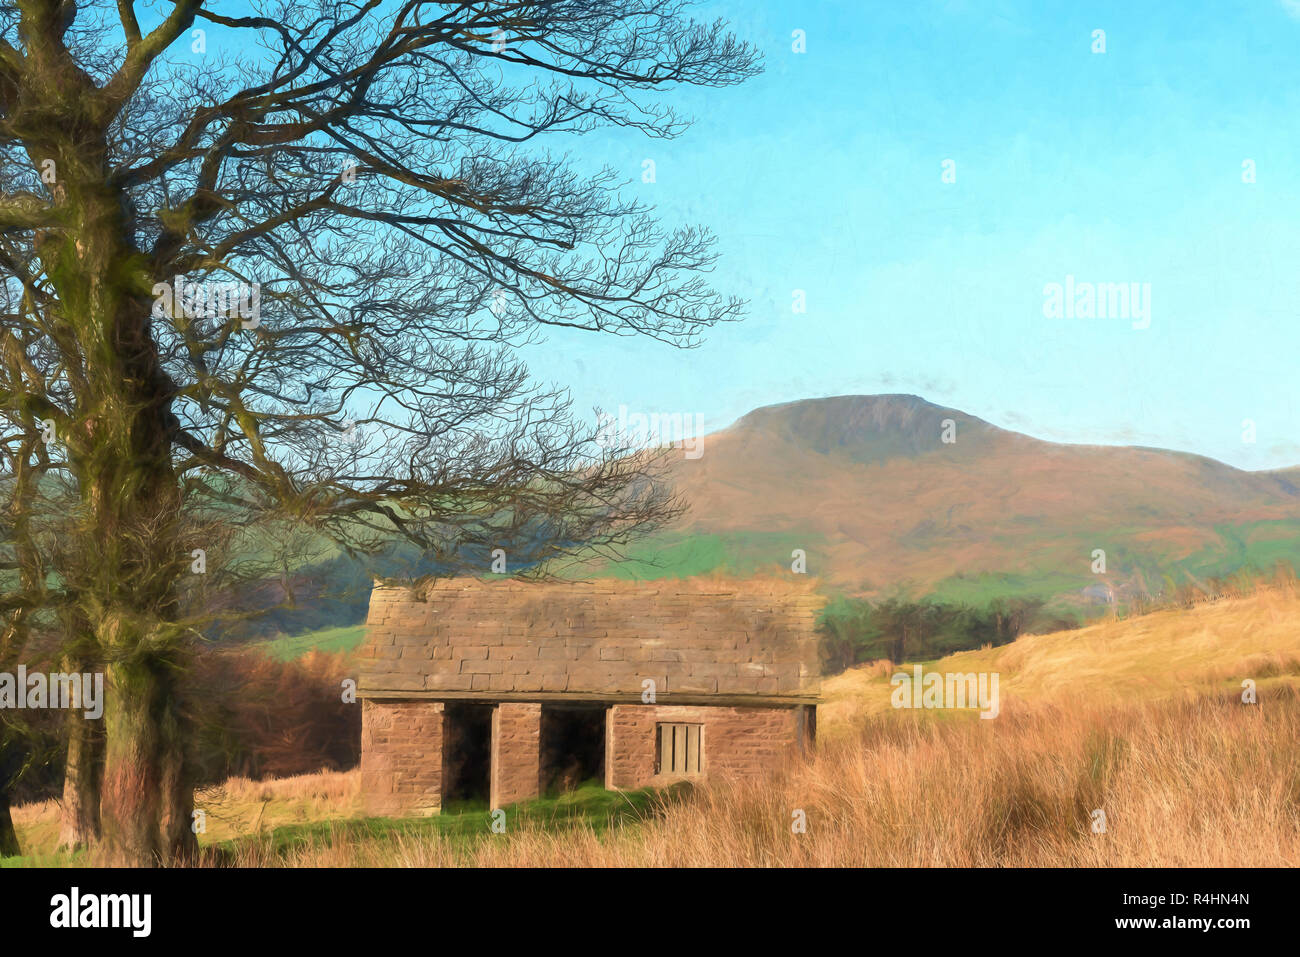 A digital watercolour of the view to a distant Shutlingsloe hill in Cheshire, Peak District National Park, UK. Stock Photo